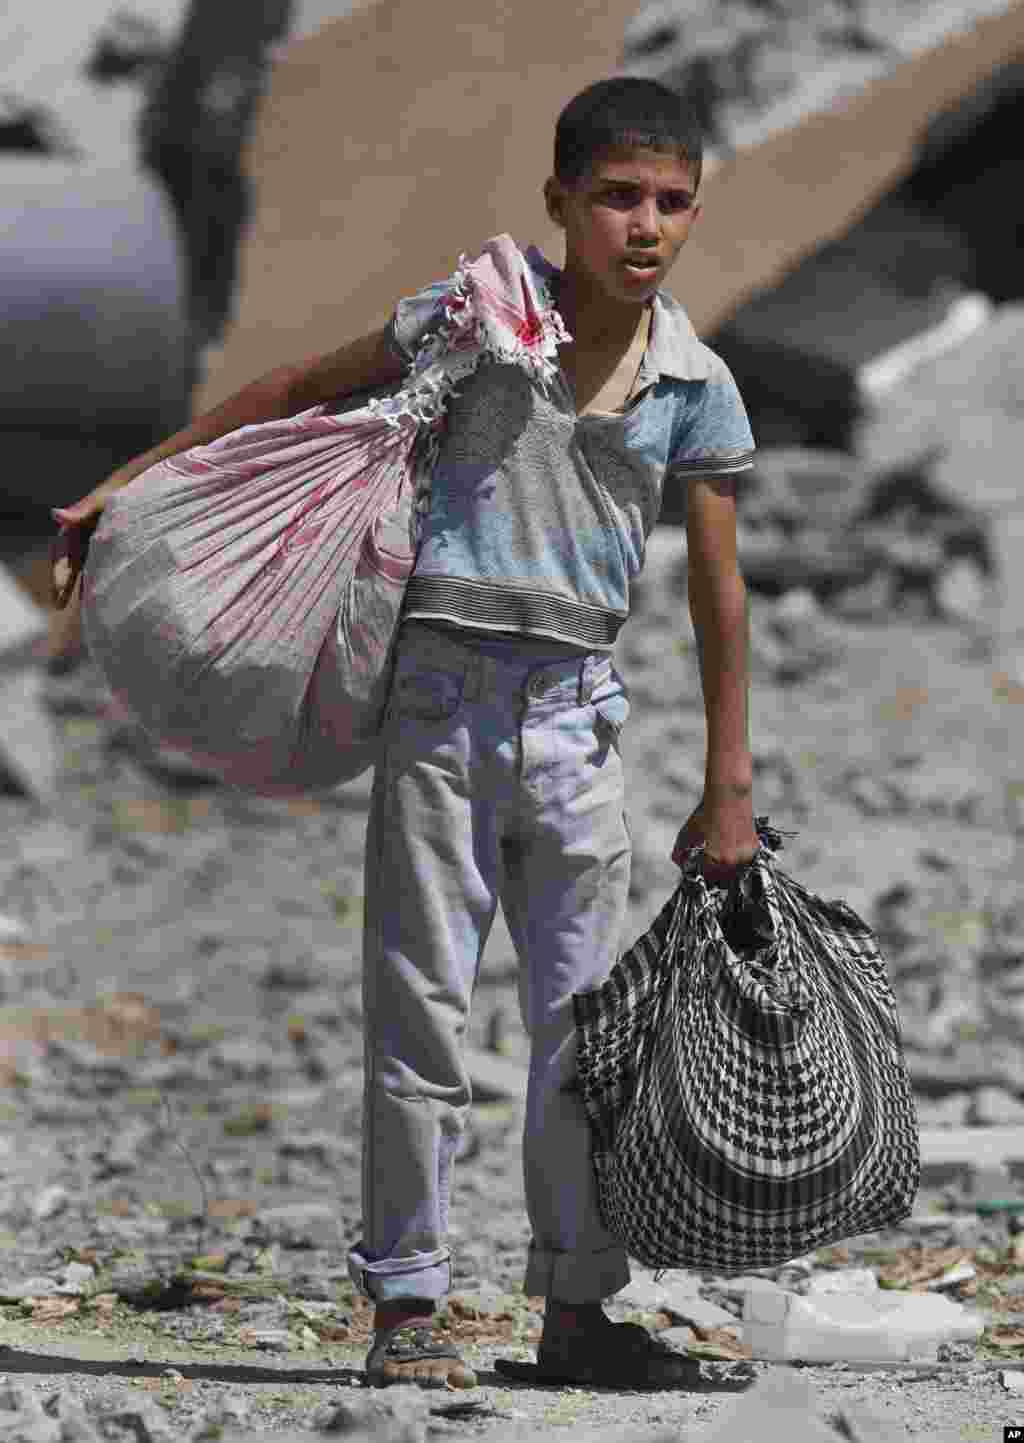 A Palestinian boy carries his belongings after salvaging them from his destroyed house, in the heavily bombed town of Beit Hanoun, Gaza Strip, close to the Israeli border, August 1, 2014.